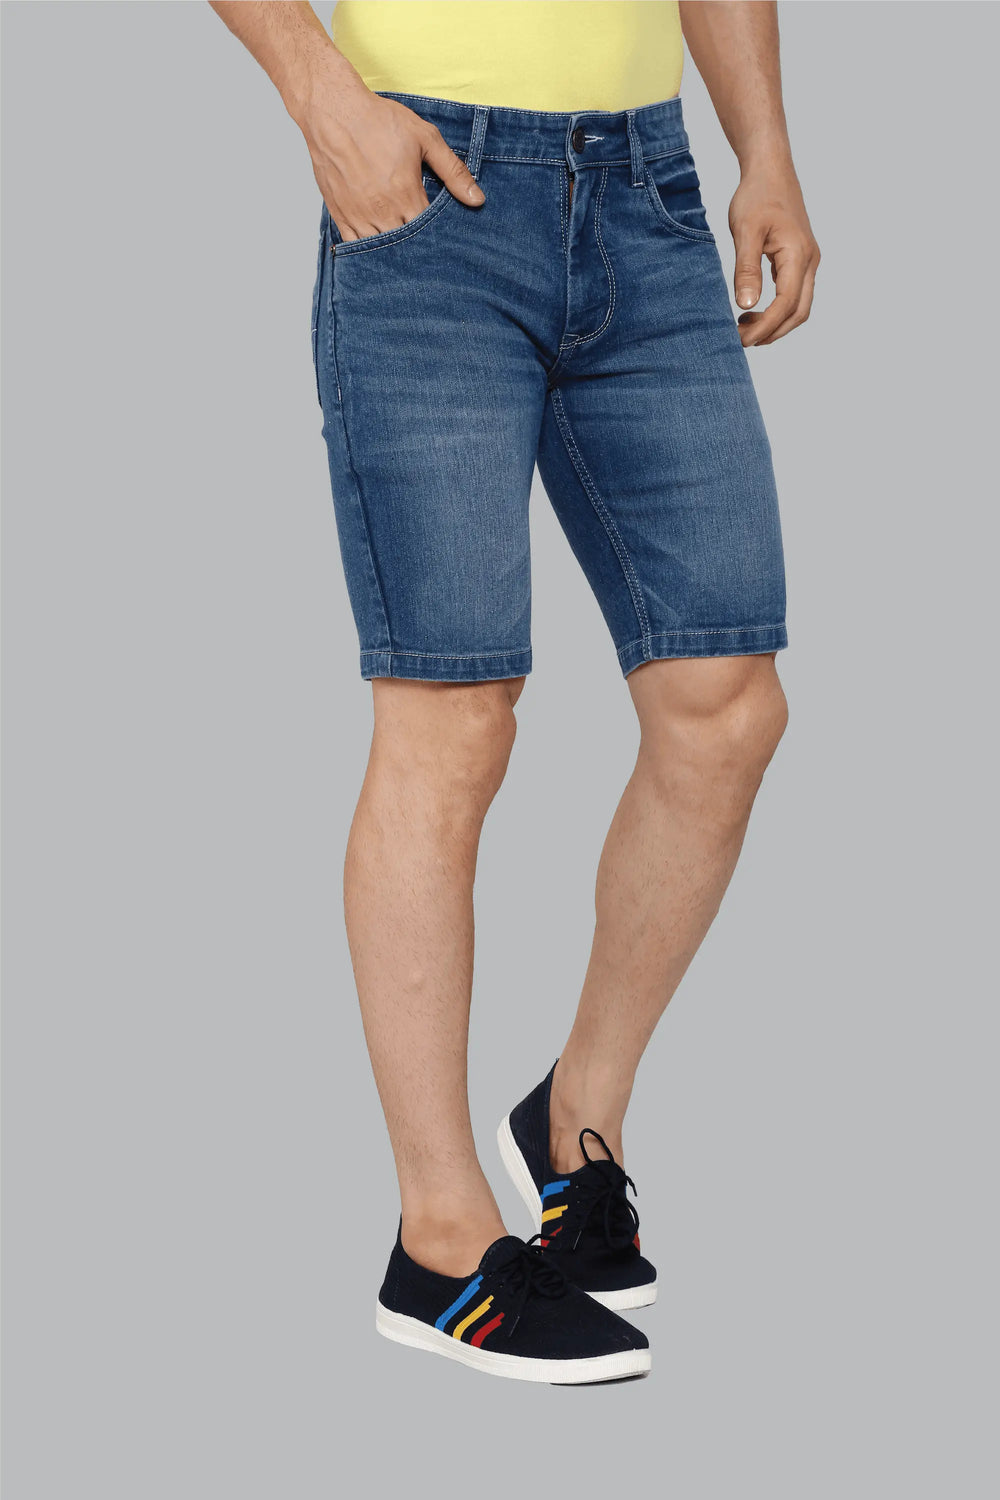 The Sliim-fit denim shorts are made of high-quality premium fabric which gives you a very premium look and comfort in wear if you are looking comfort with quality then this denim shorts is made for you